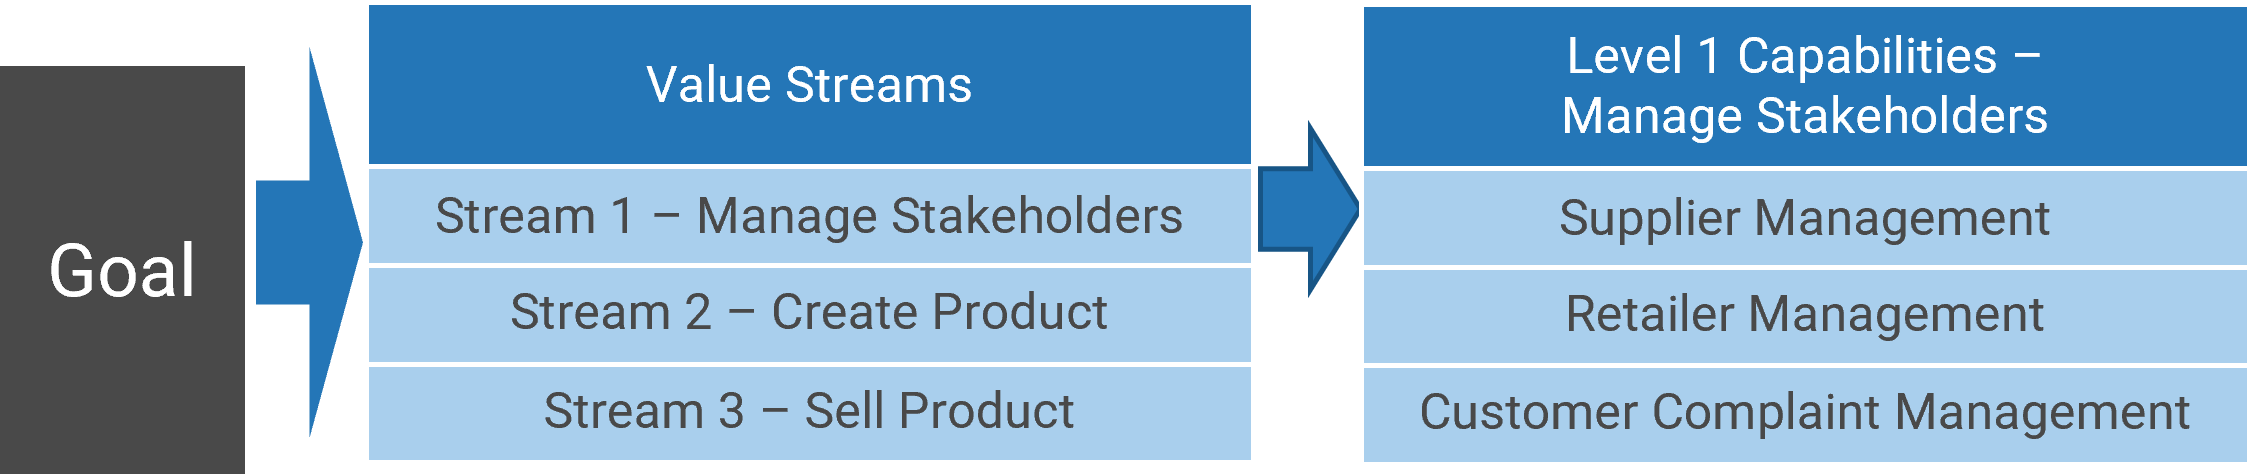 Example table for outlining 'Value Streams' and 'Level 1 Capabilities' through 'Goals'.